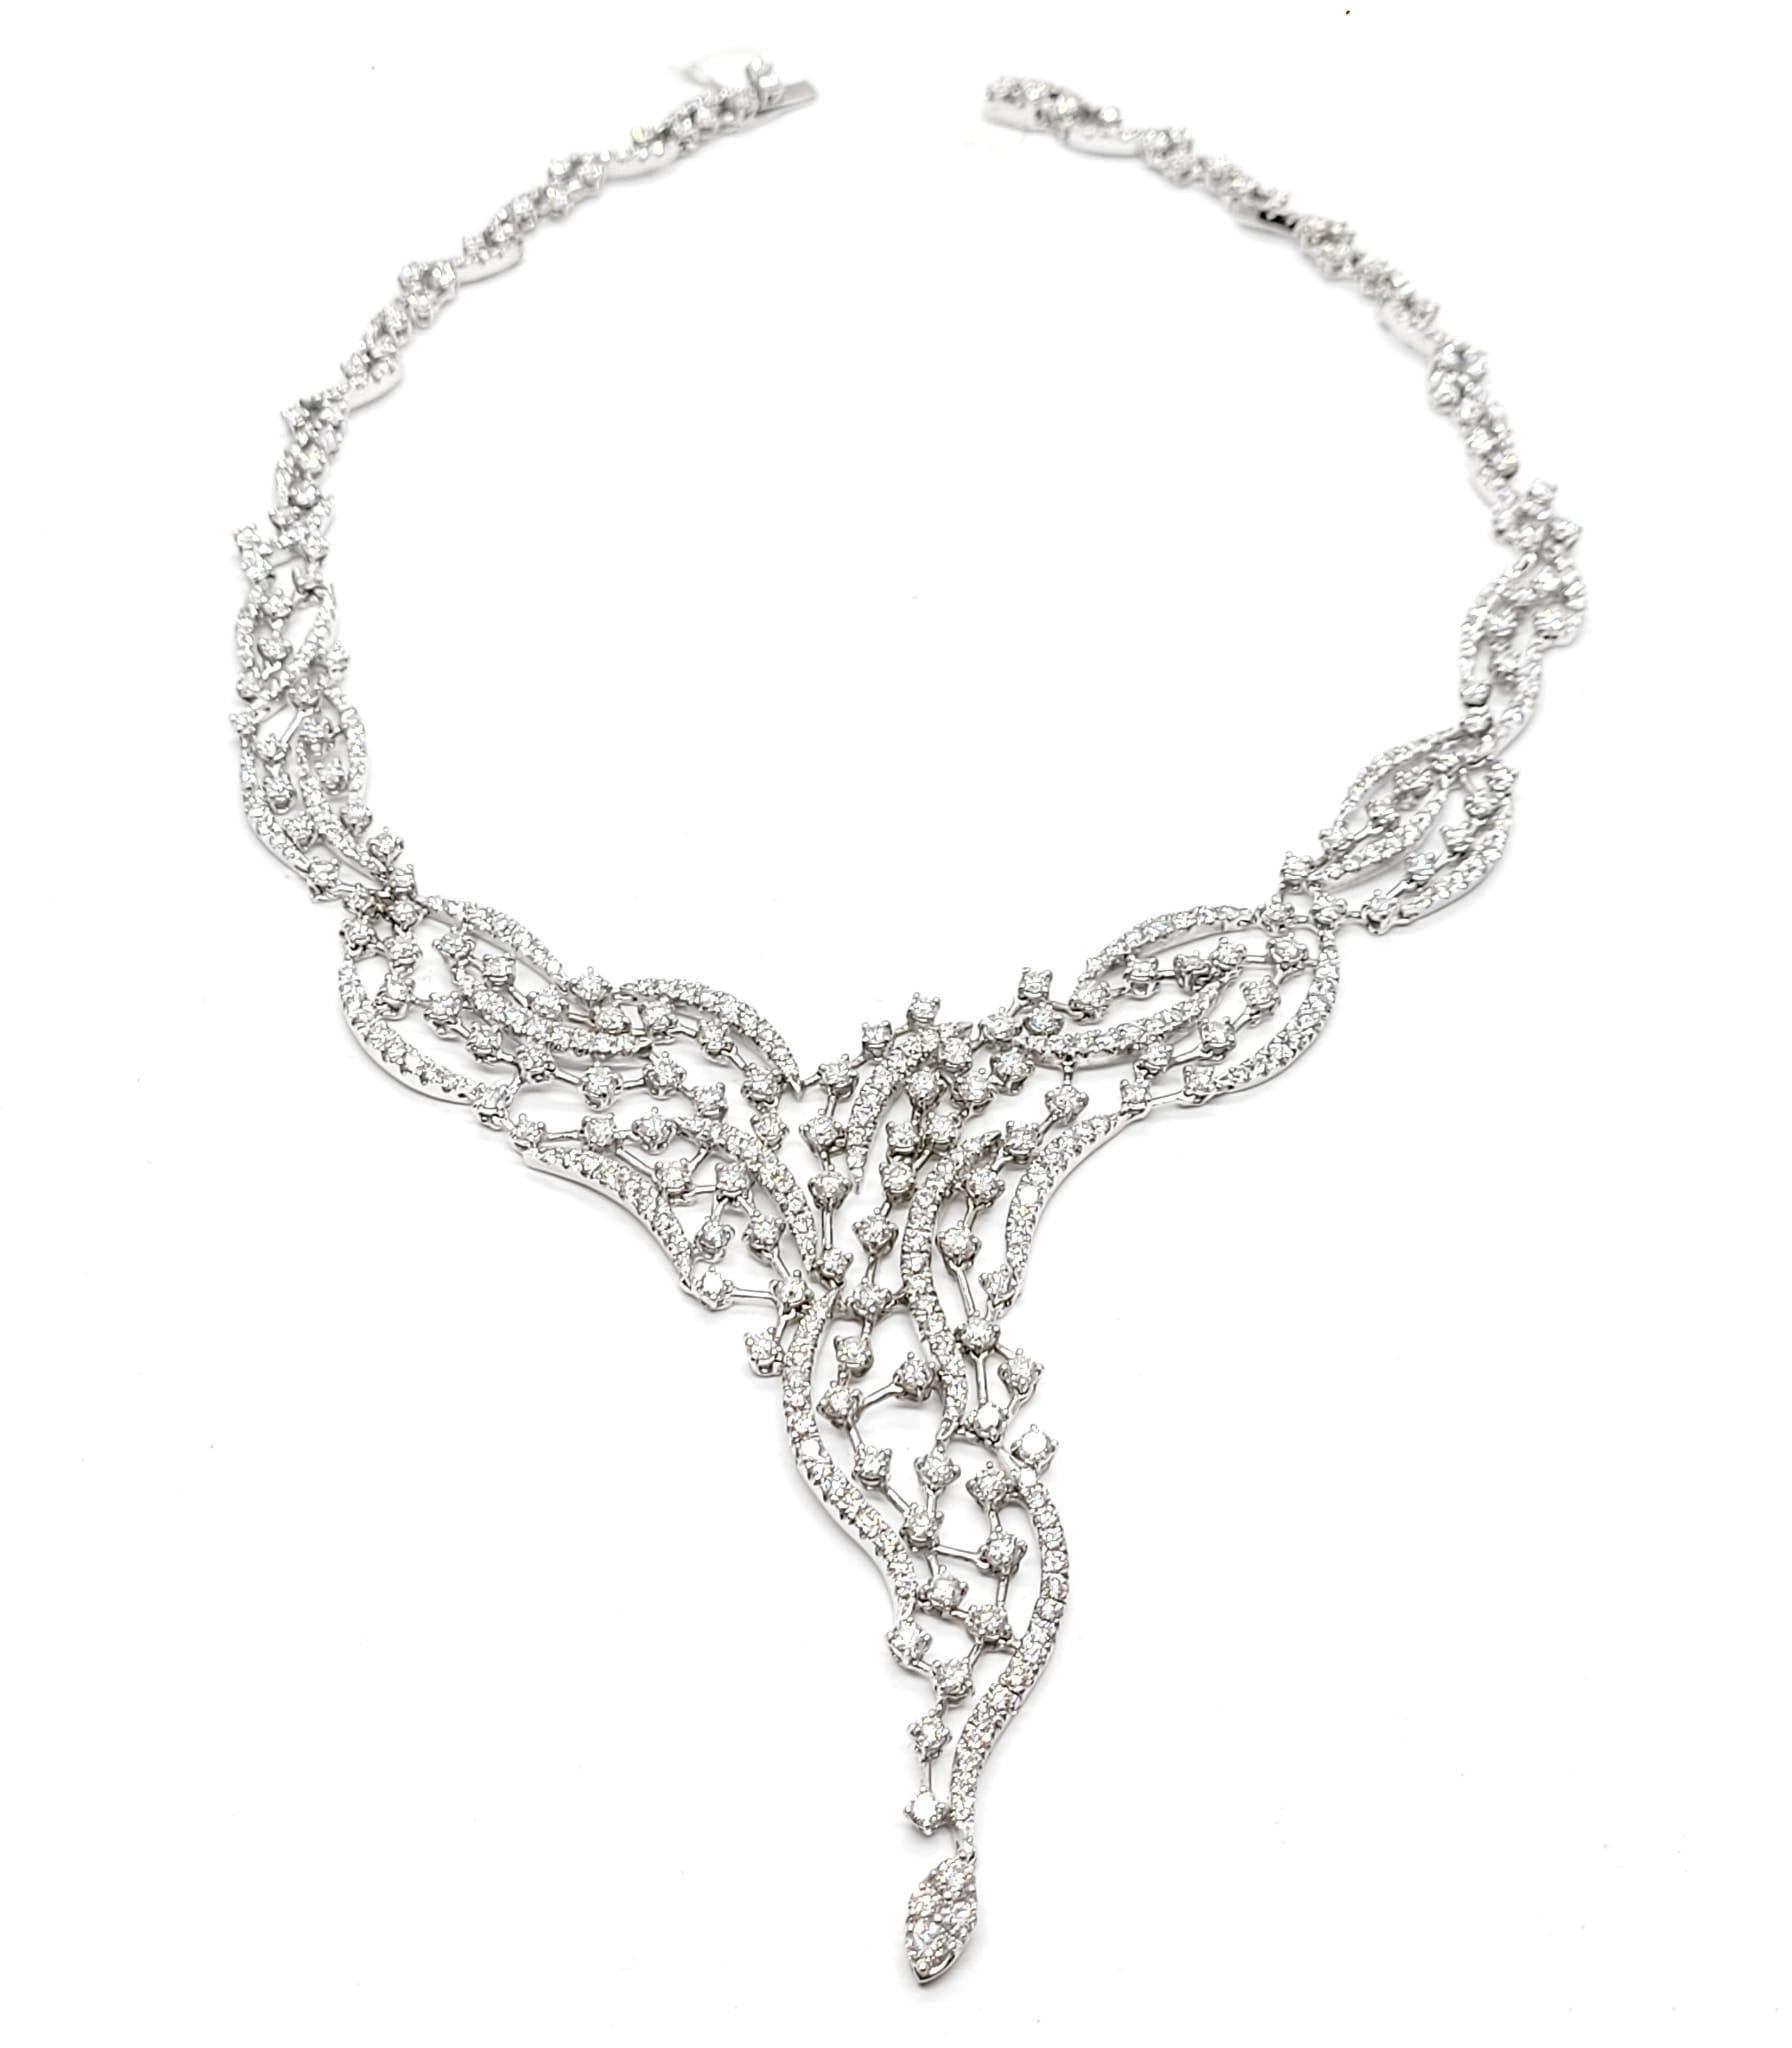 Contemporary Andreoli 20.31 Carat Diamond 18 Karat Gold Necklace For Sale